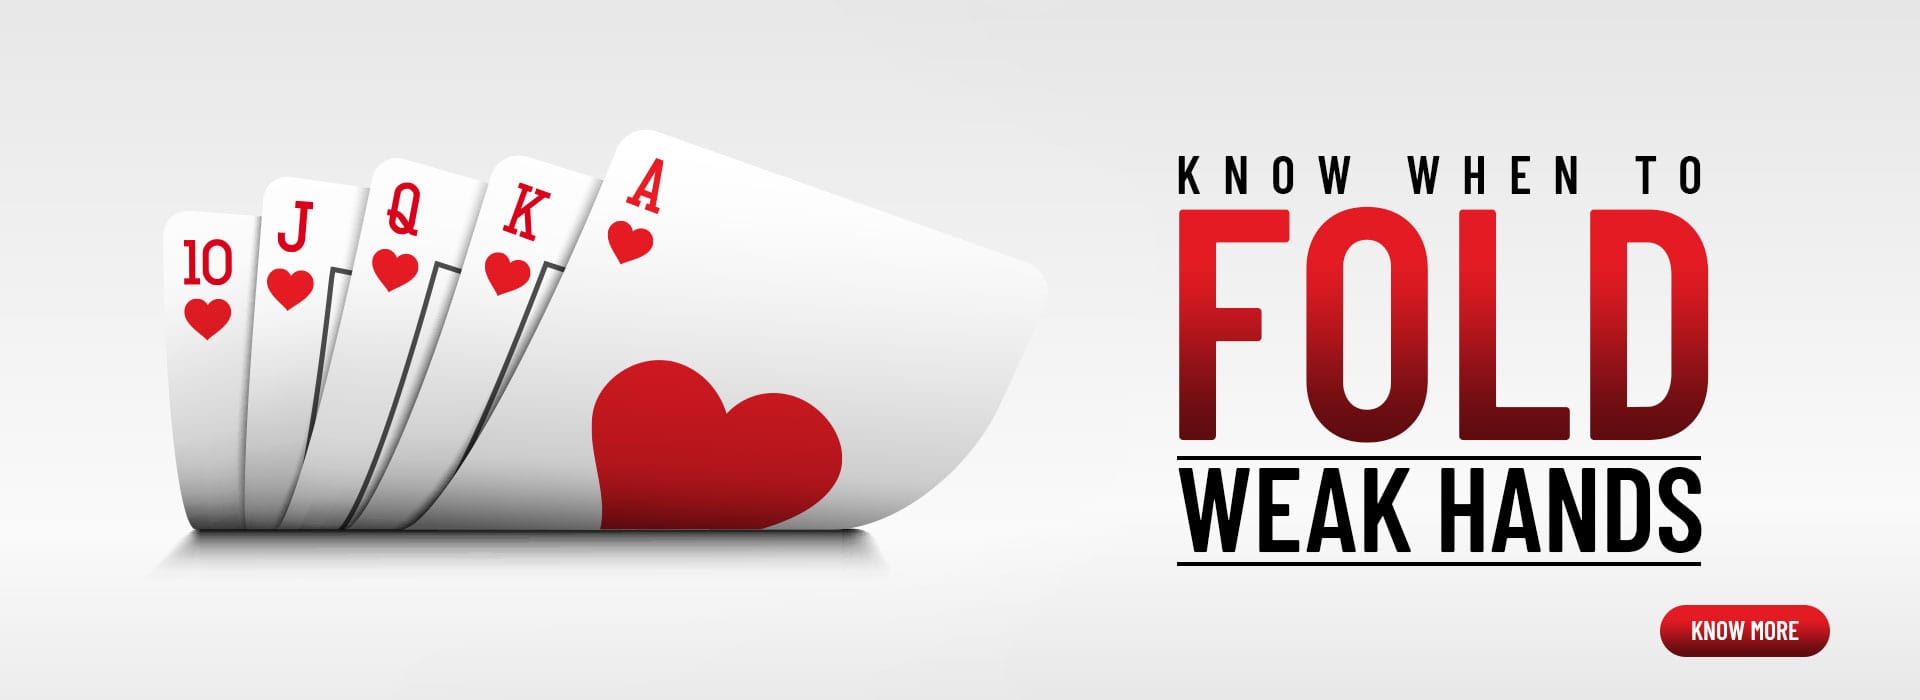 Knowing when to fold weak hands